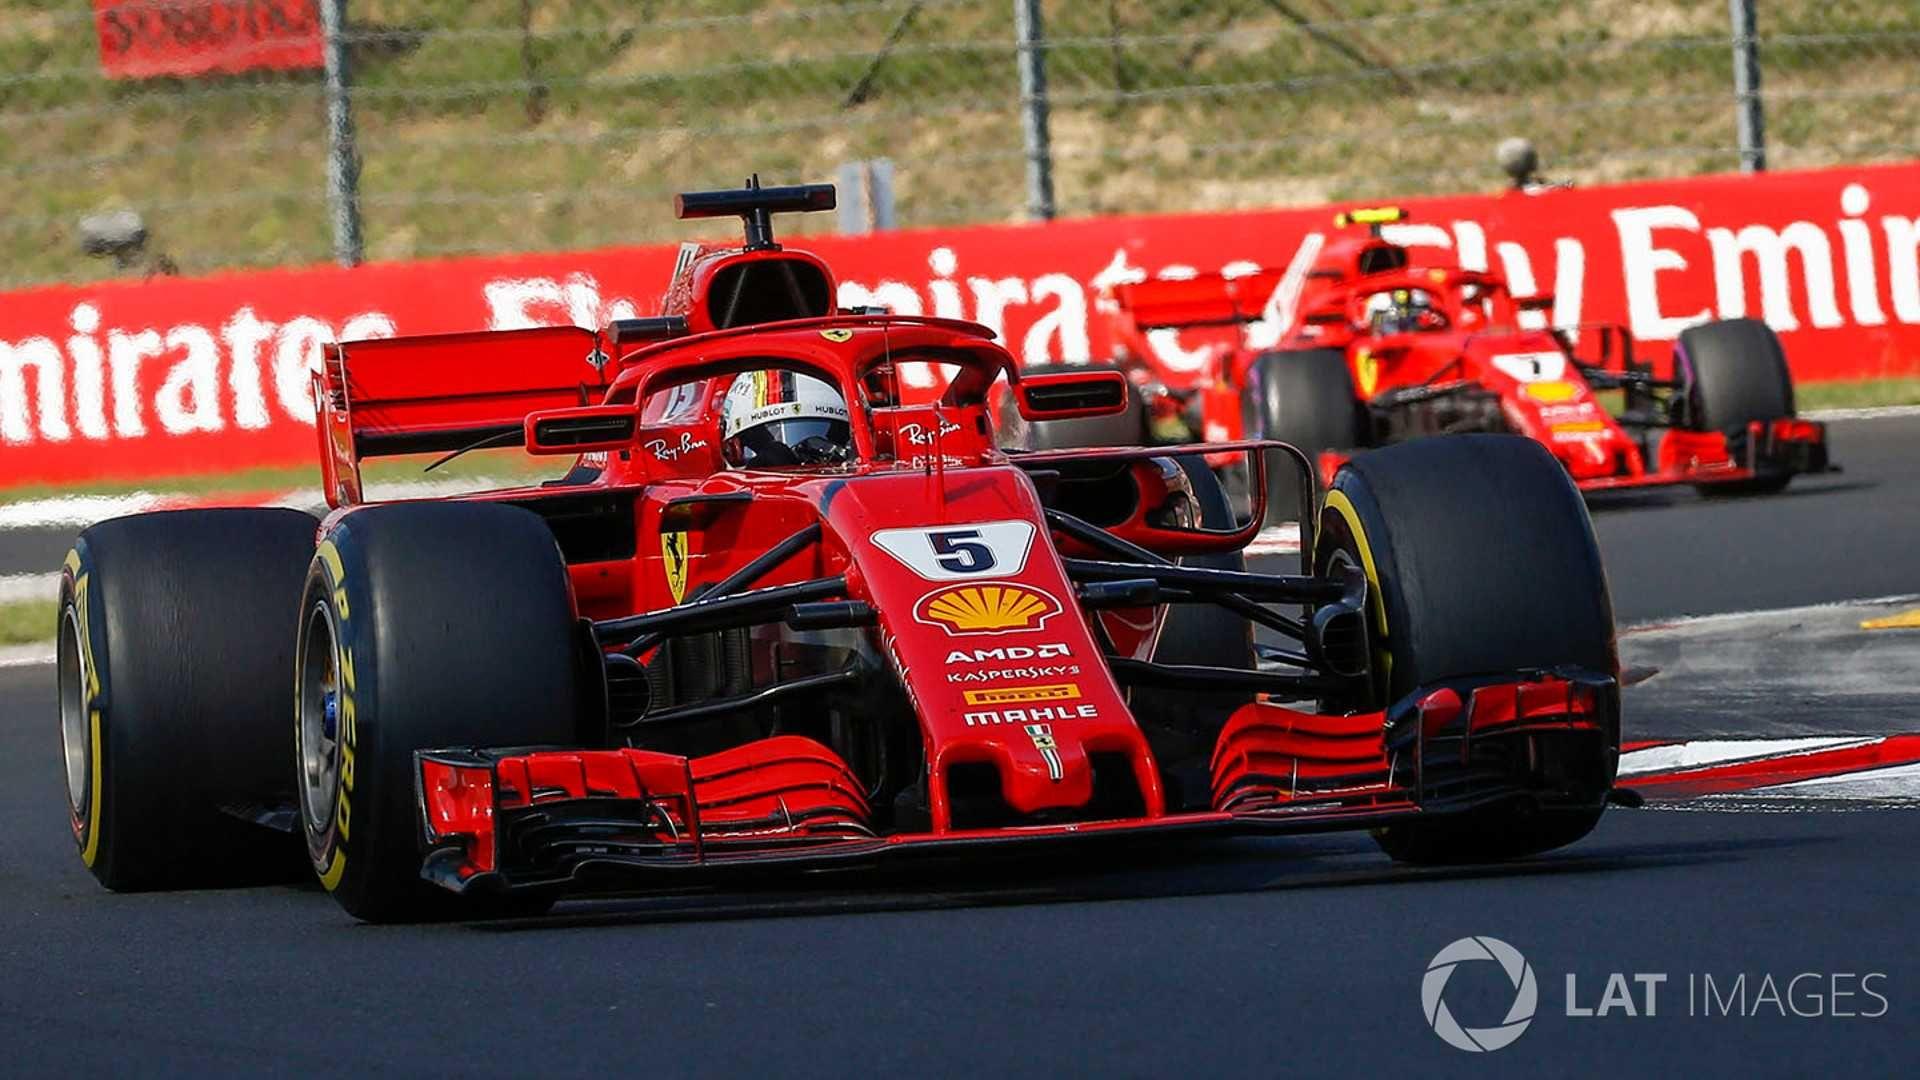 Ferrari plans to increase its F1 budget in 2019